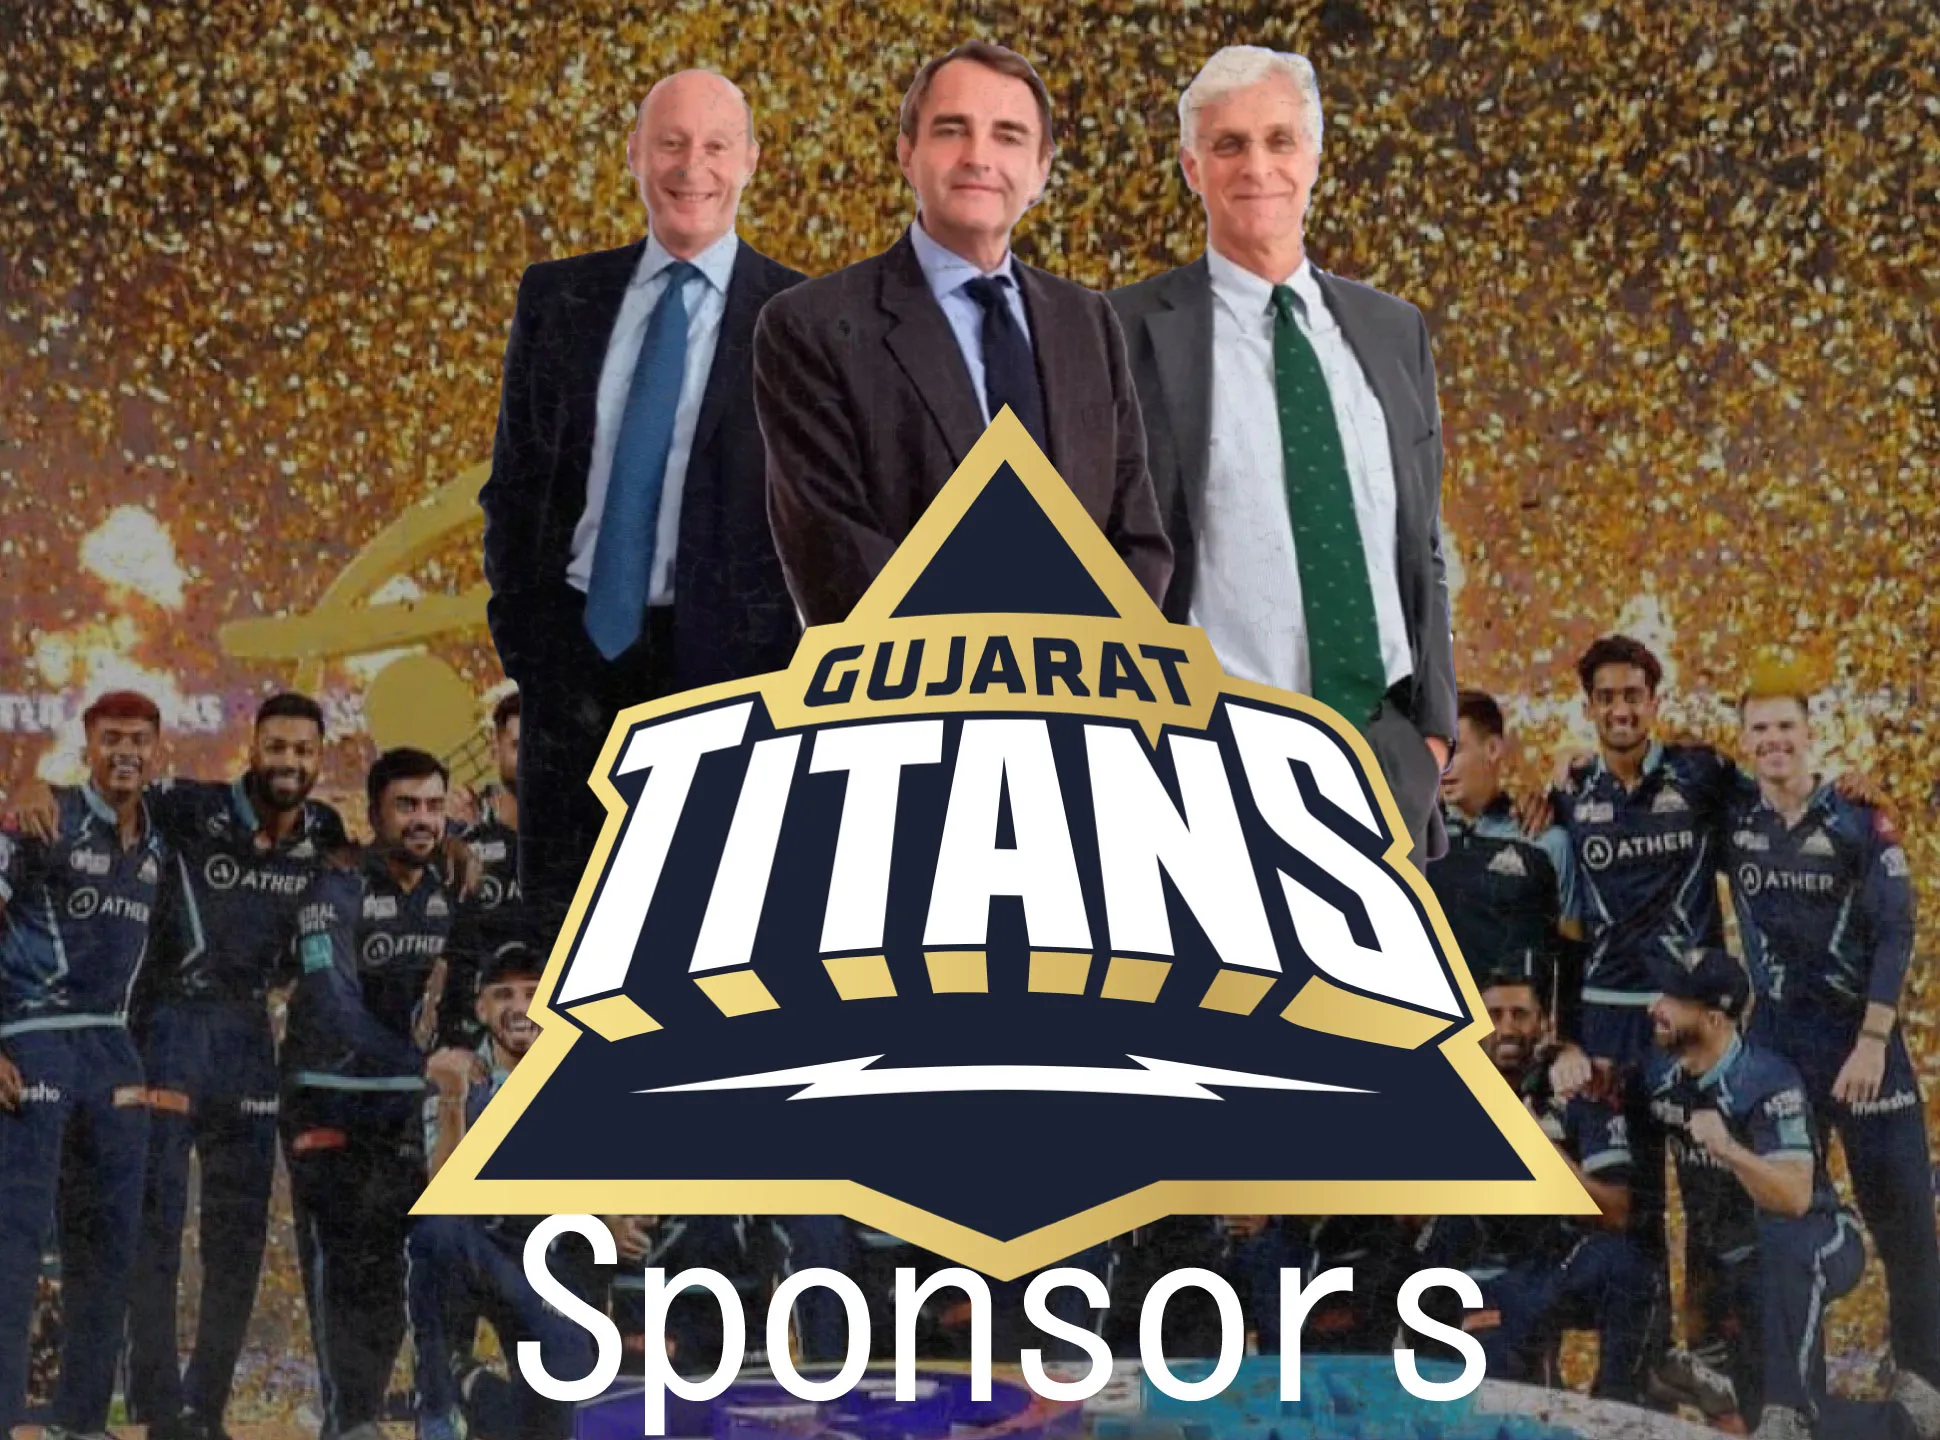 Here are the sponsors of the team Gujarat Titans.